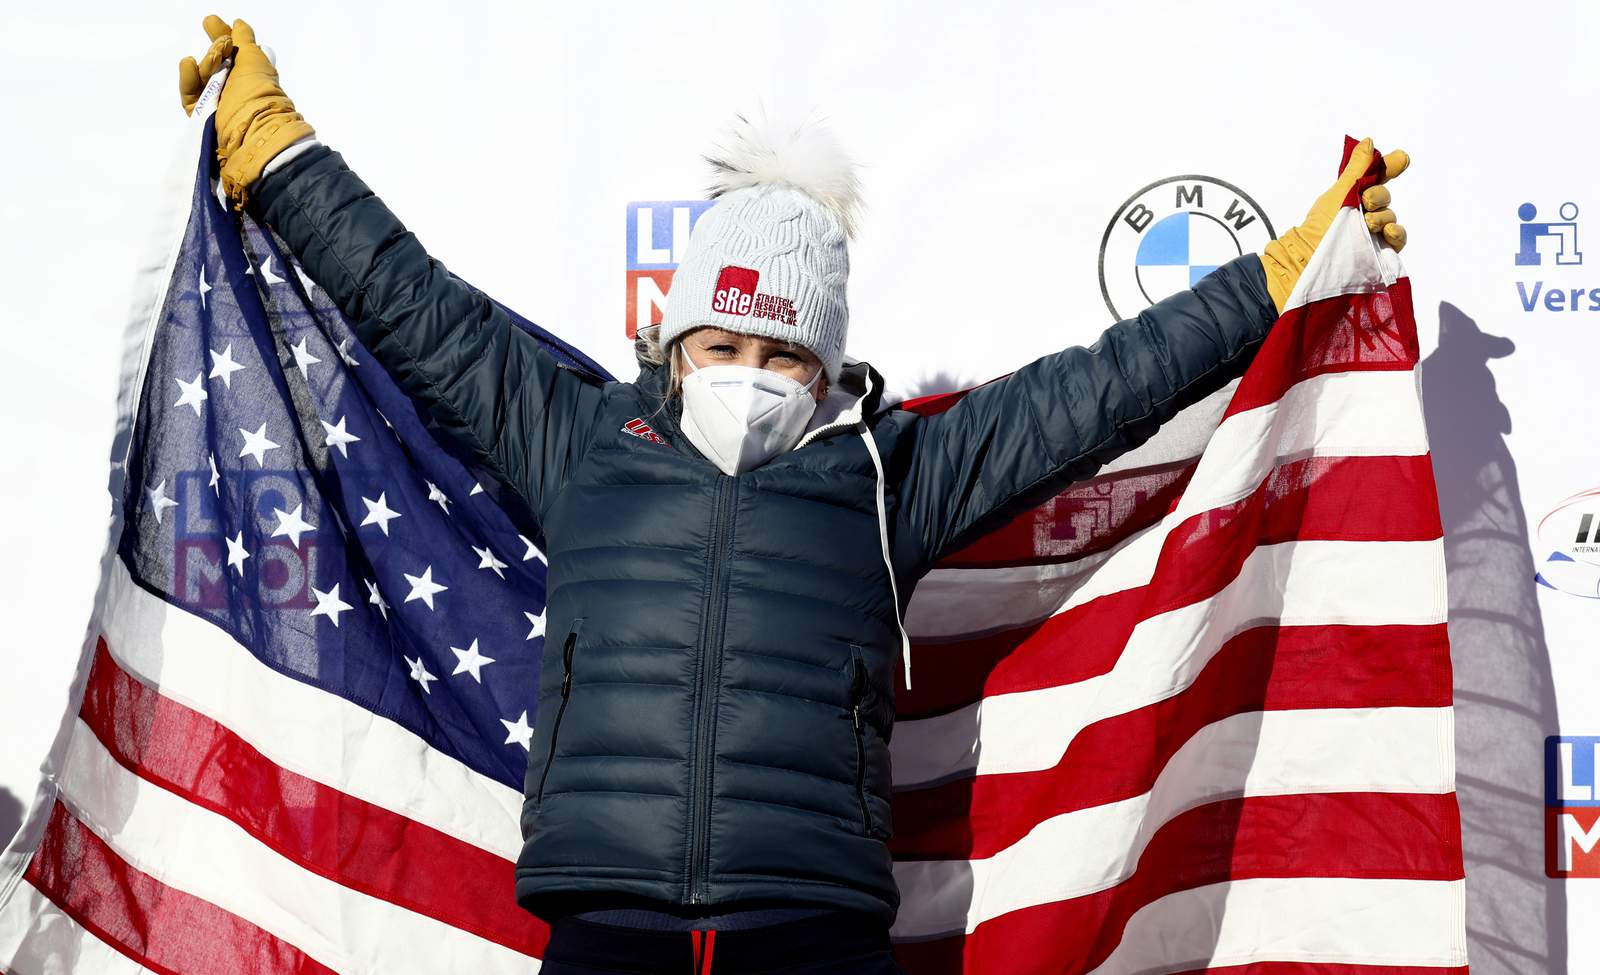 Double gold: Humphries finishes off historic bobsled sweep